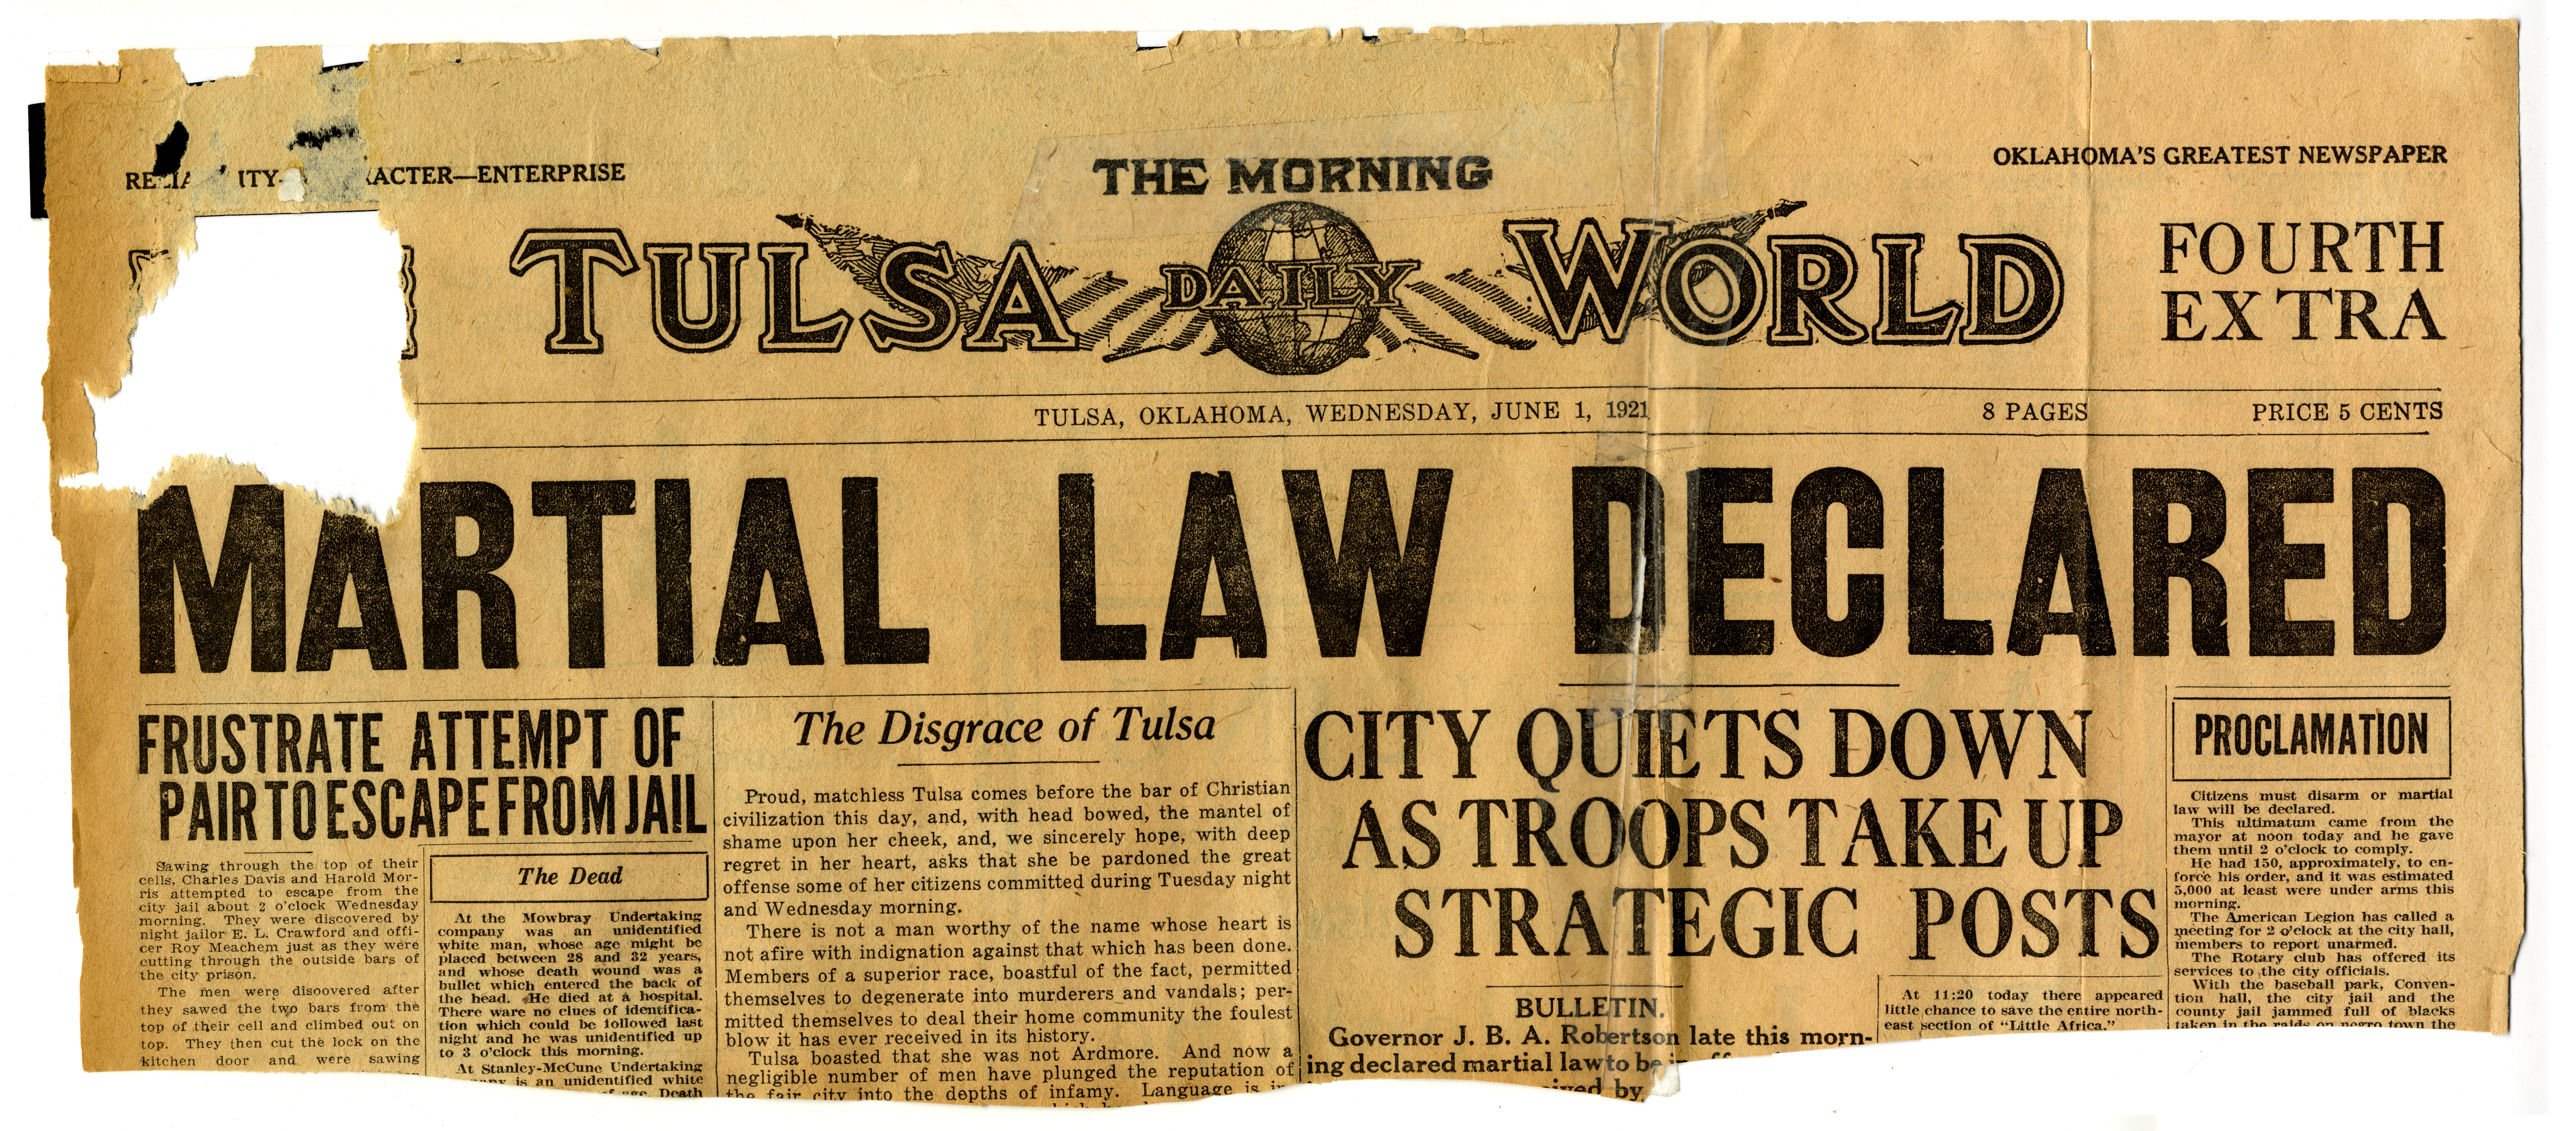 Partial clipping of the top of a newspaper. Headlines include "MARTIAL LAW DECLARED," "FRUSTRATE ATTEMPT OF PAIR TO ESCAPE FROM JAIL," "THE DISGRACE OF TULSA," "CITY QUIETS DOWN AS TROOPS TAKE UP STRATEGIC POSTS," and "PROCLAMATION".